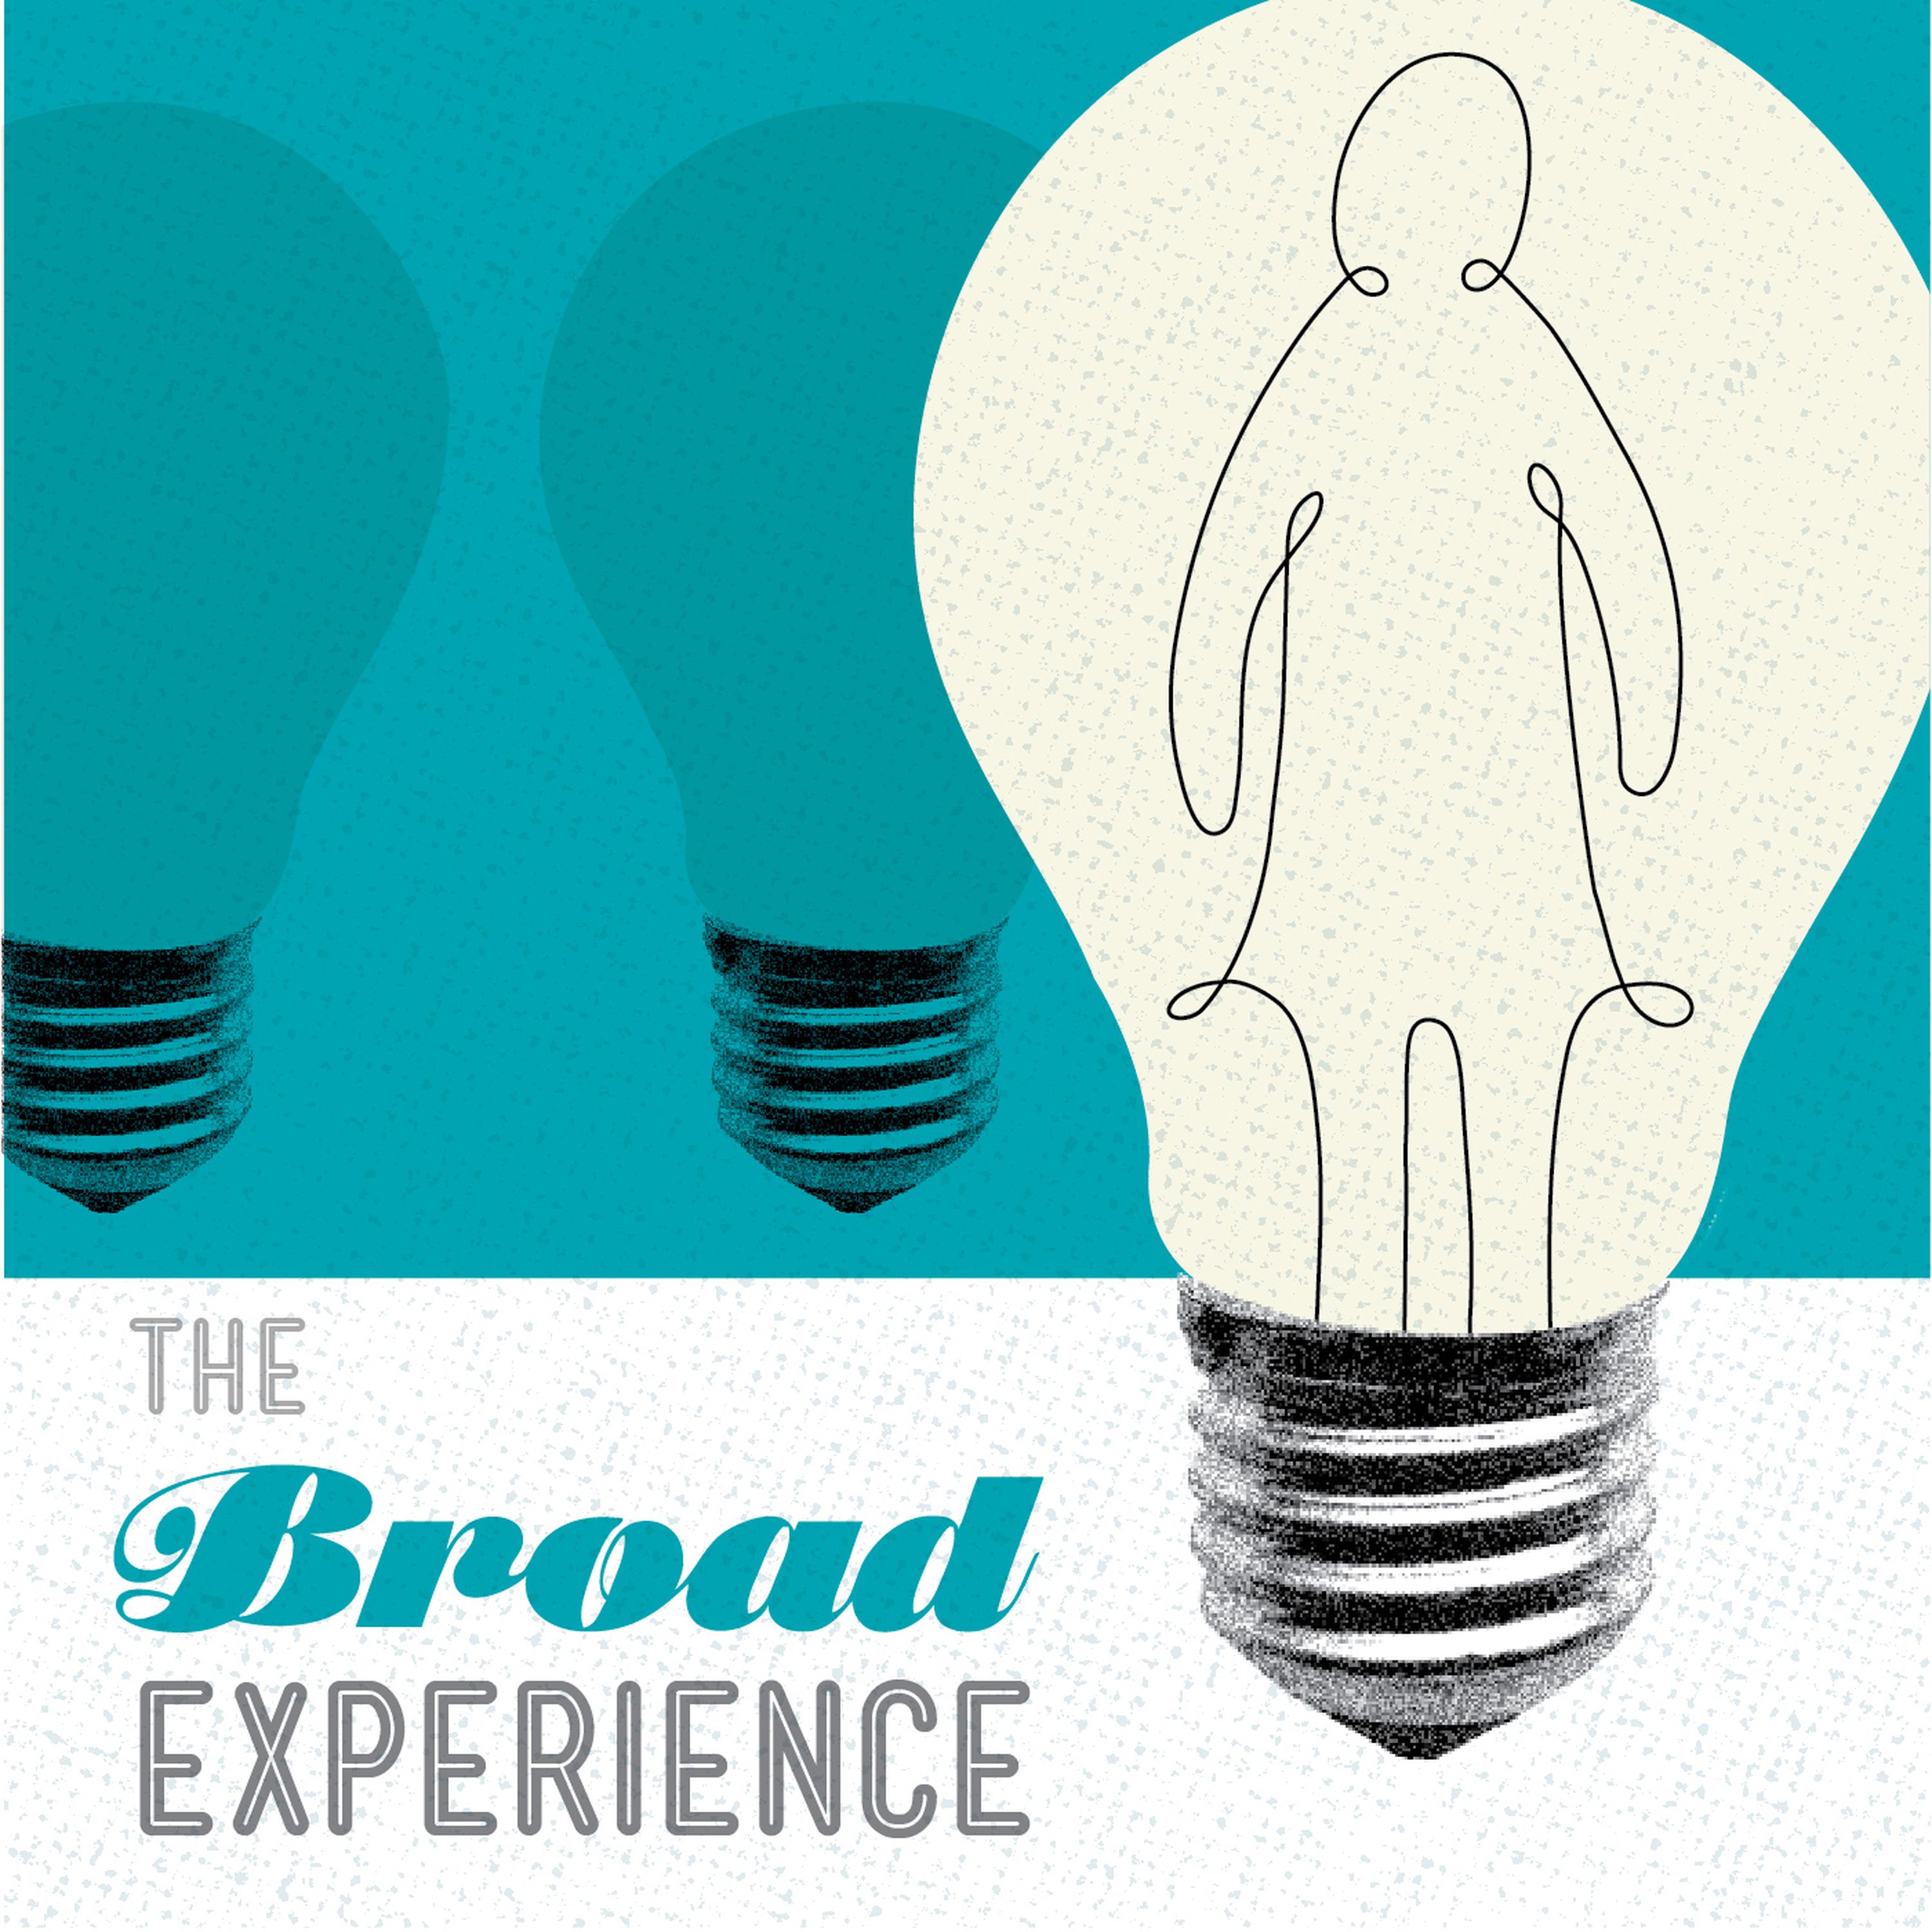 The Broad Experience 15: Do we have to fit in?